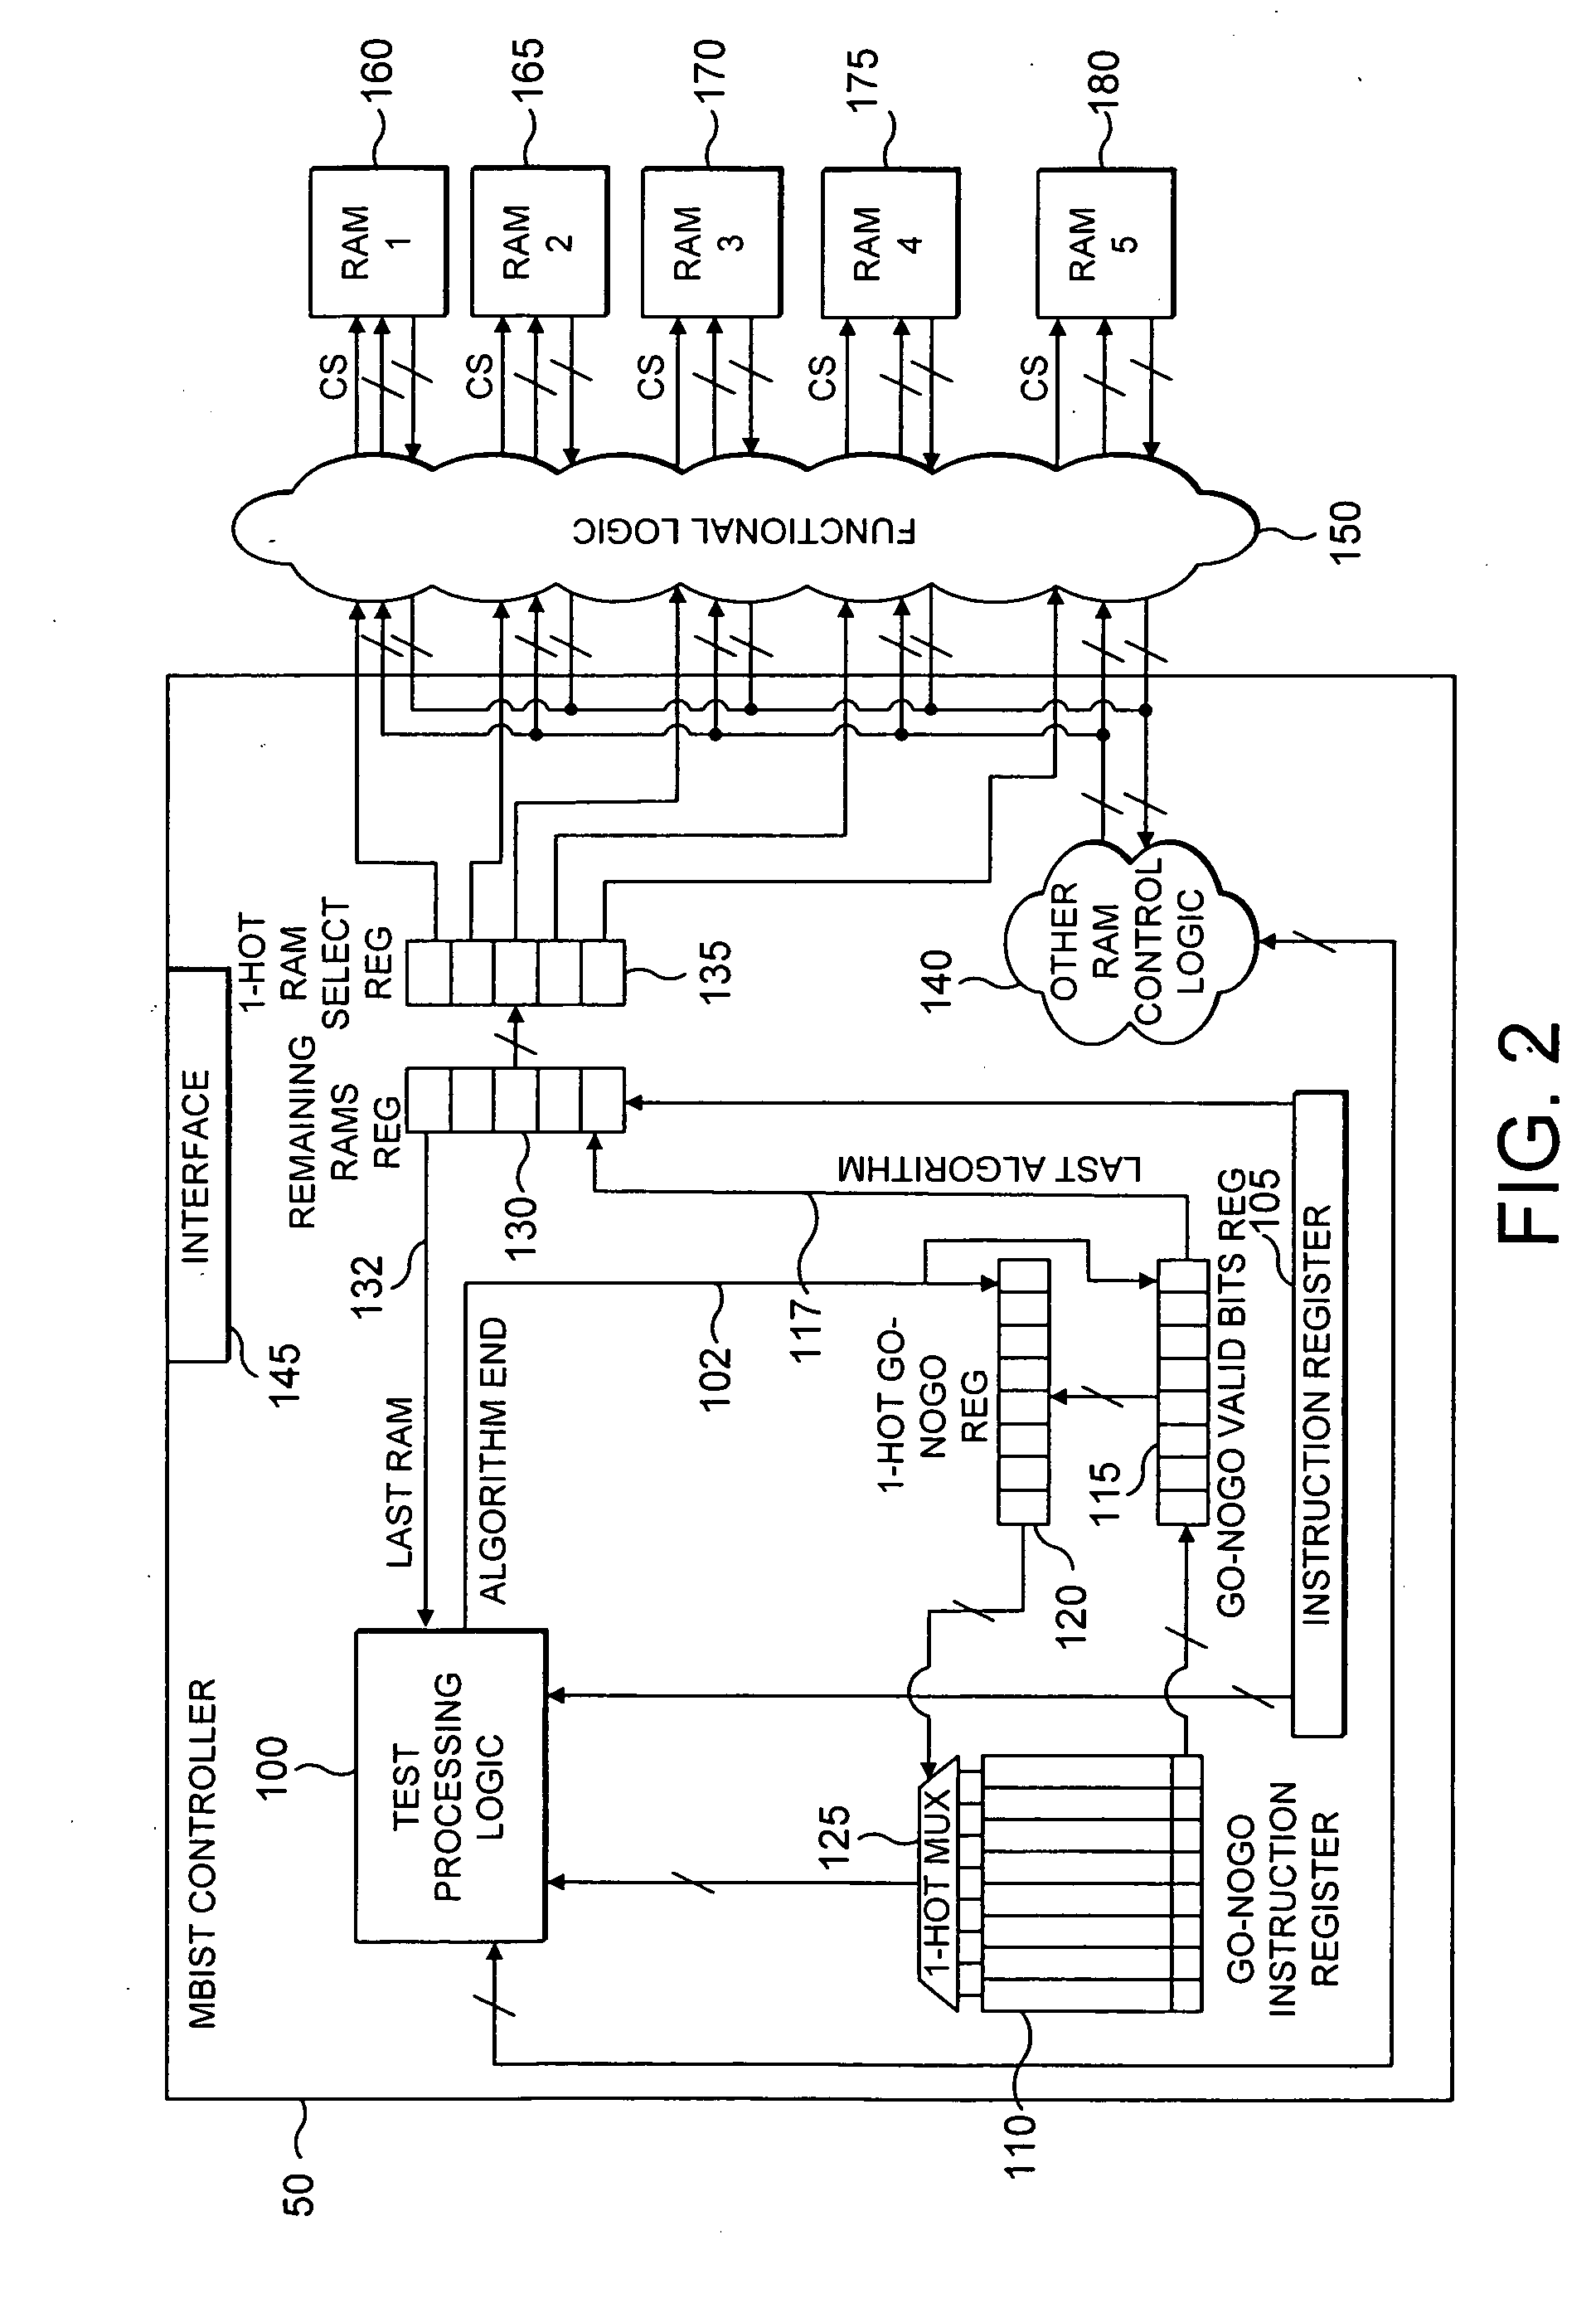 Integrated circuit and method for testing memory on the integrated circuit